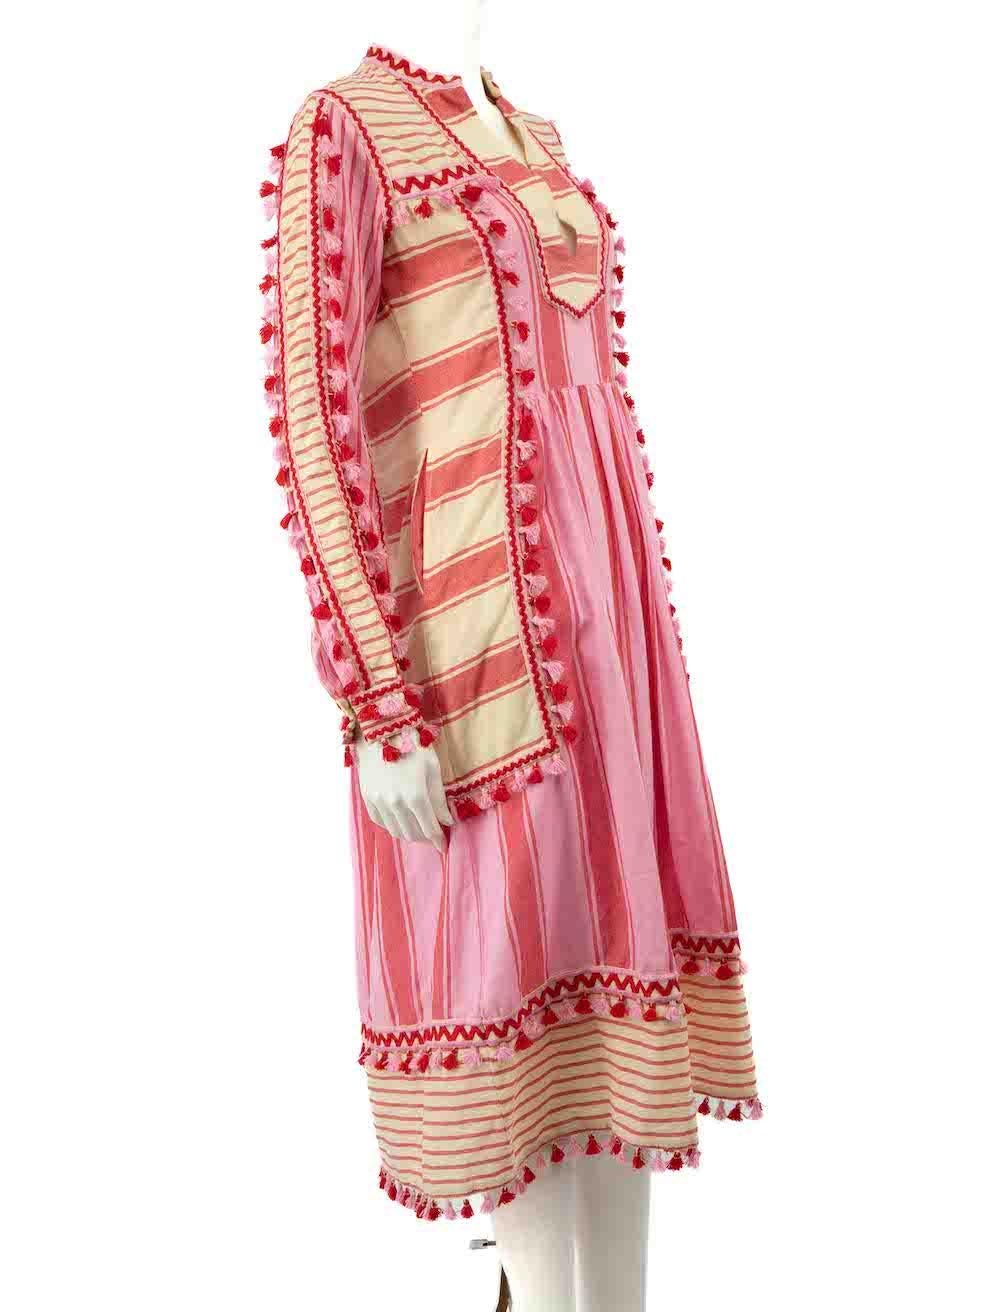 CONDITION is Very good. Minimal wear to dress is evident. Minimal pull to weave on the front of skirt and discoloured mark to the rear hem on this used Dodo Bar Or designer resale item.
 
 
 
 Details
 
 
 Pink
 
 Cotton
 
 Dress
 
 Beige striped